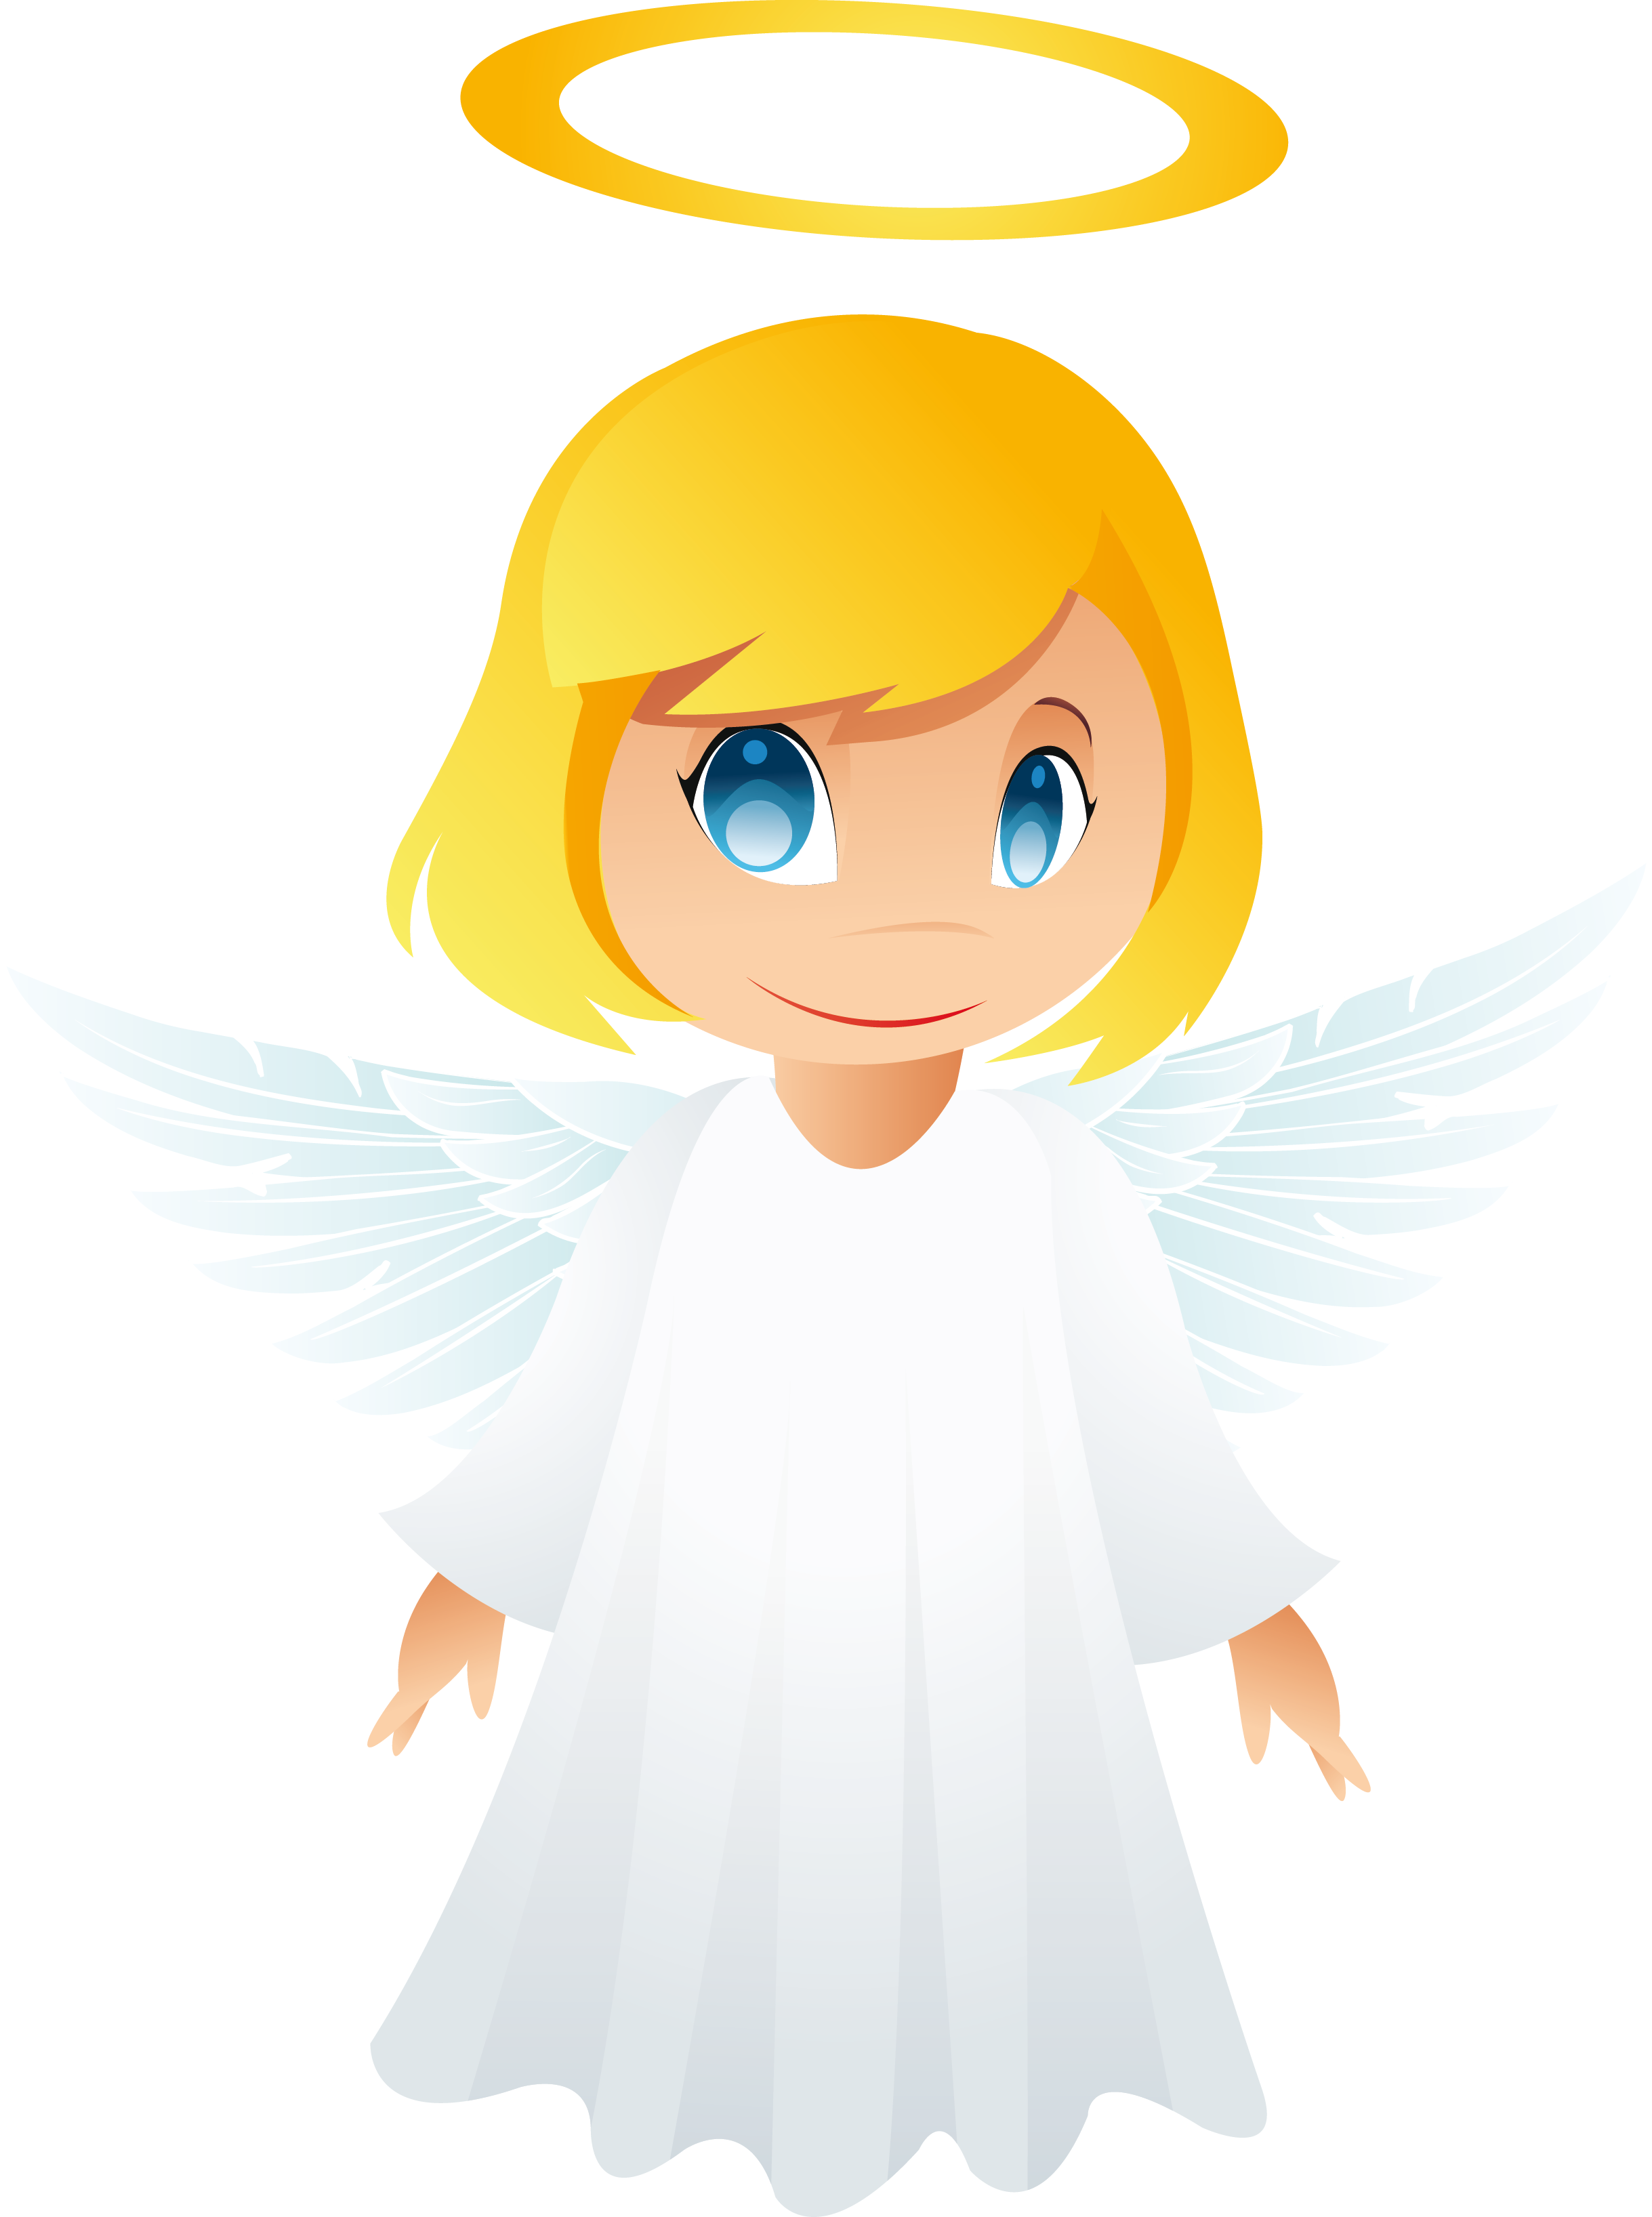 angels png clipart for photoshop - photo #13